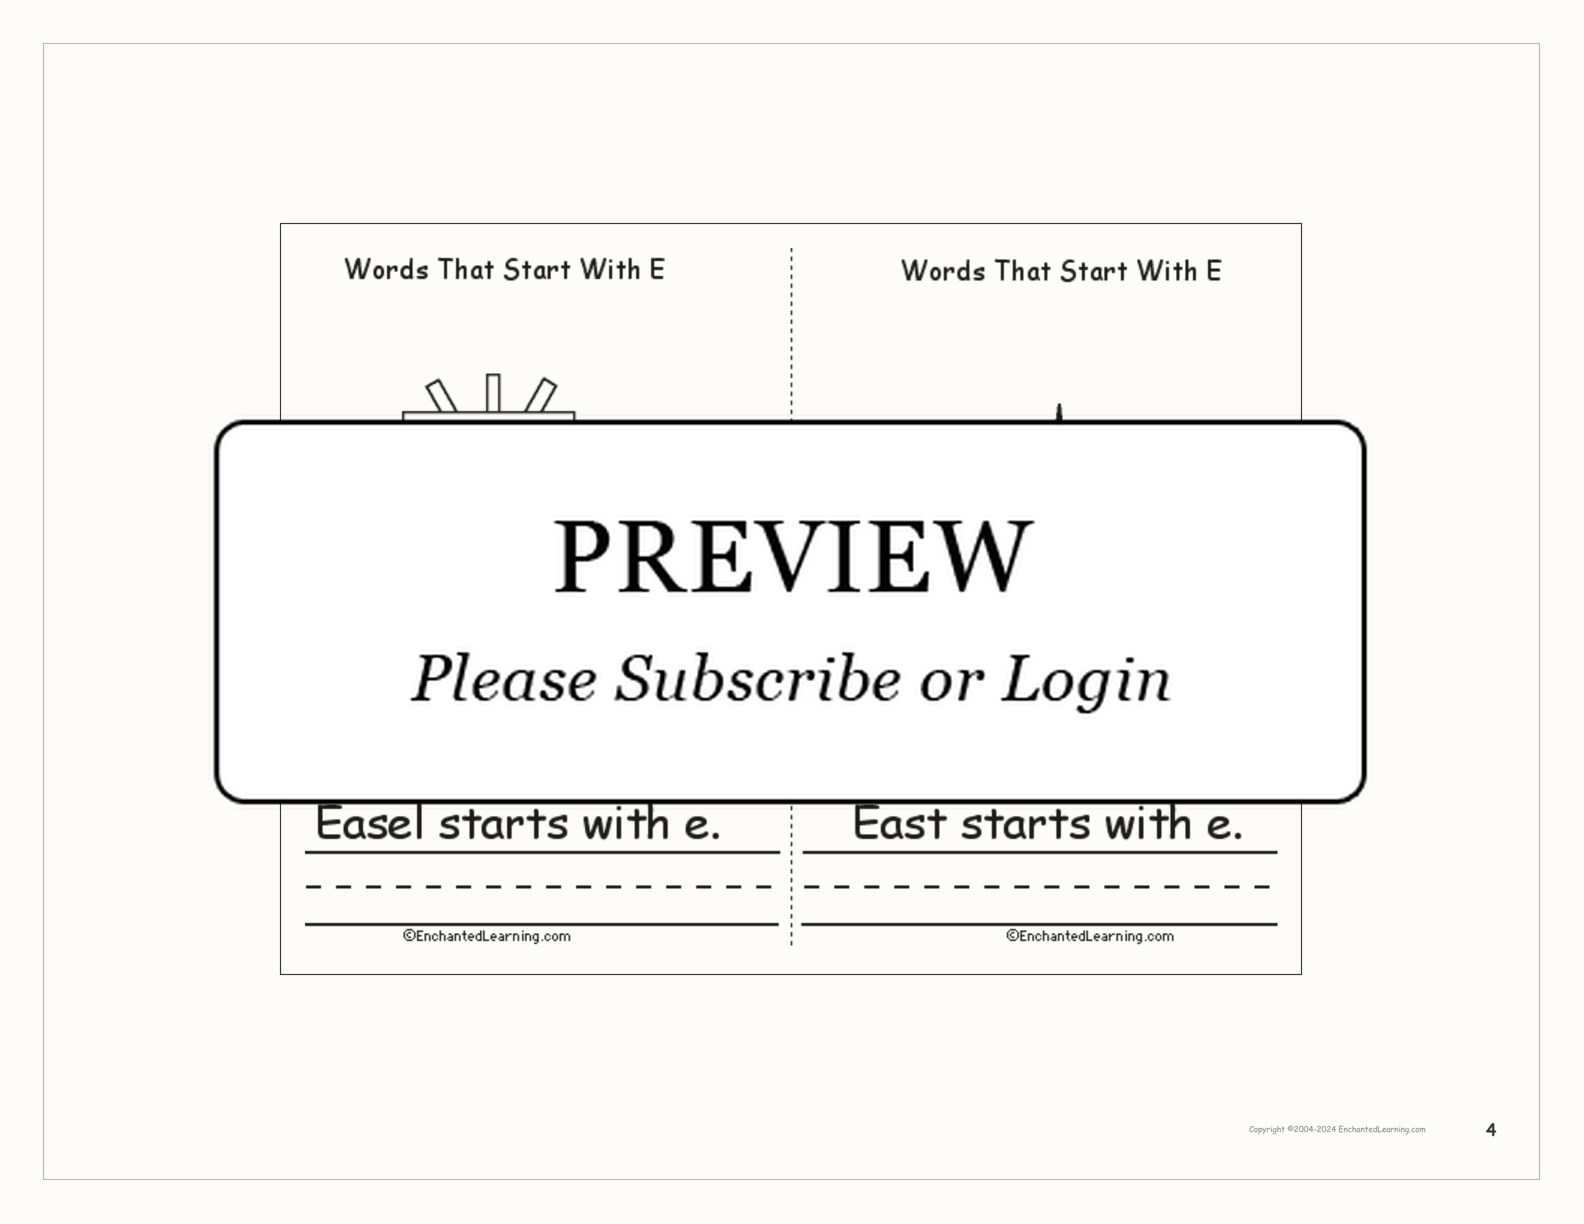 Words That Start With E interactive worksheet page 4